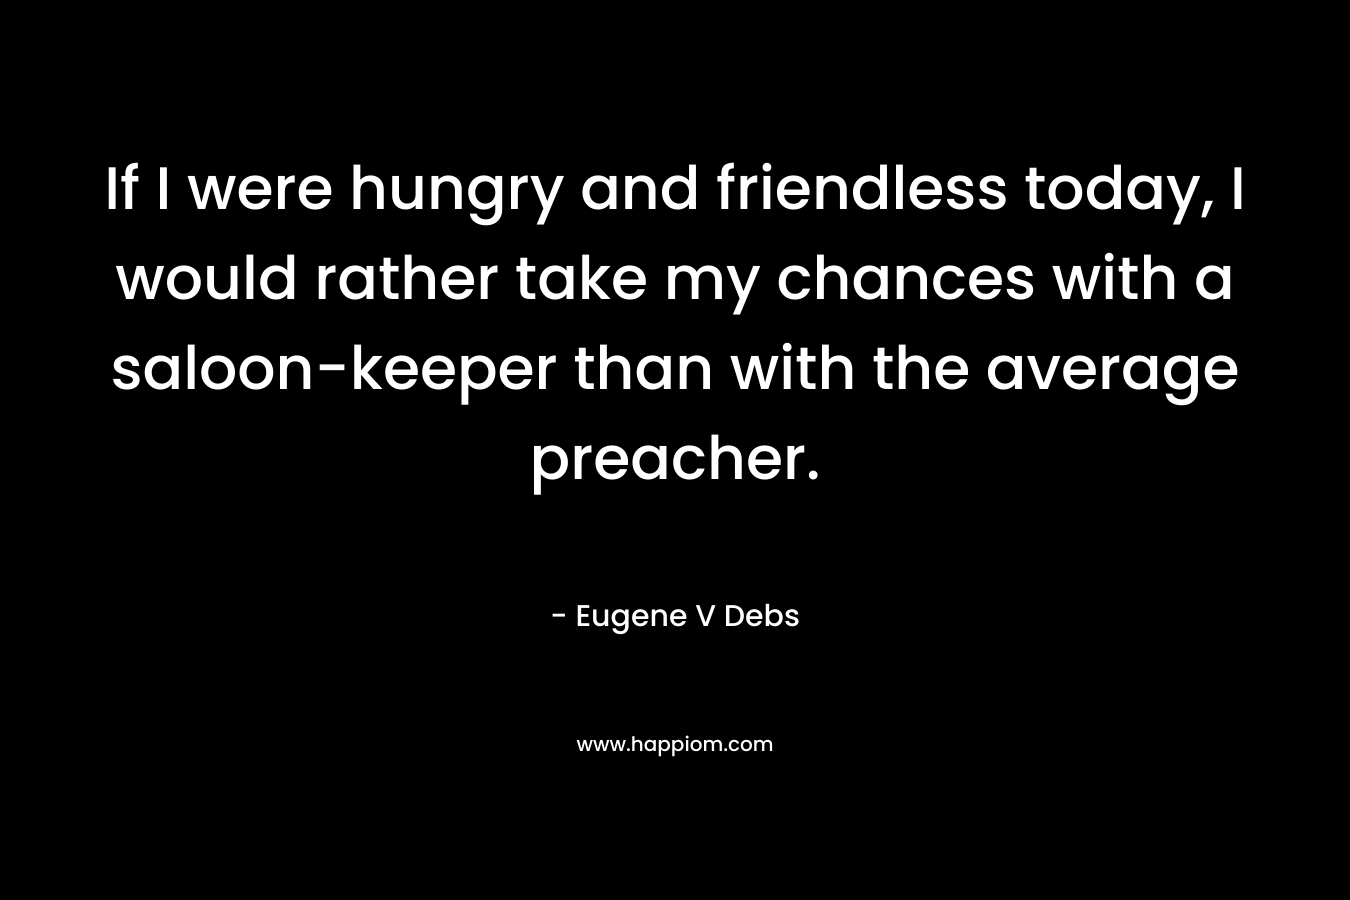 If I were hungry and friendless today, I would rather take my chances with a saloon-keeper than with the average preacher. – Eugene V Debs